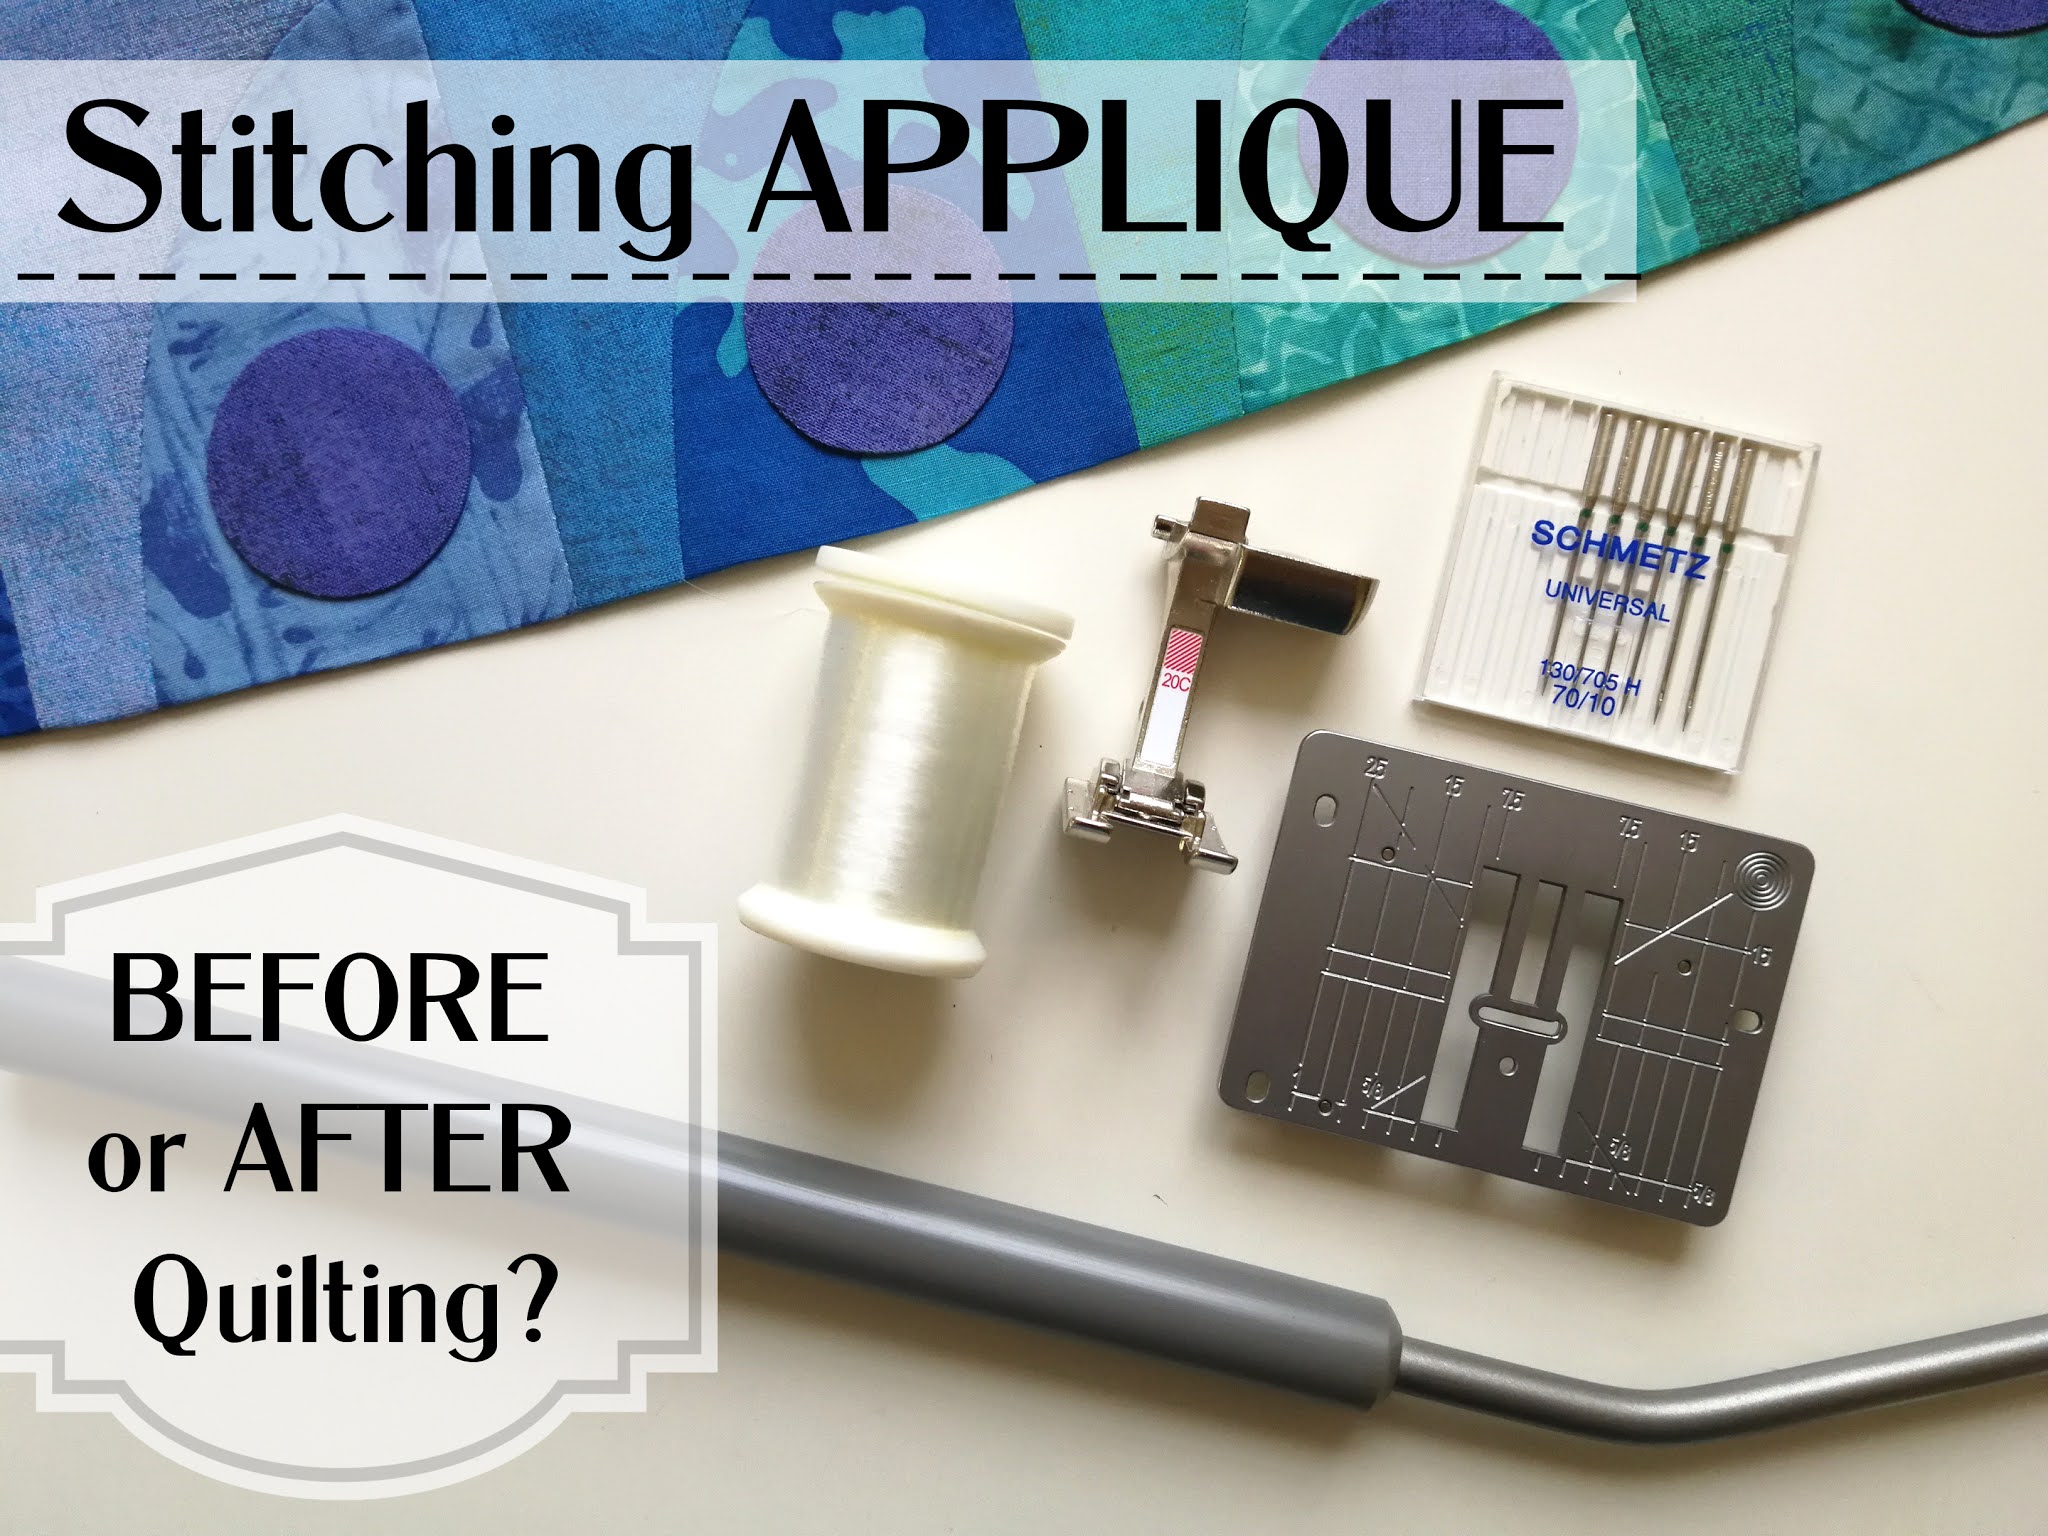 HOW-TO: Stitching Applique BEFORE or AFTER Quilting? | Campbell Soup Diary